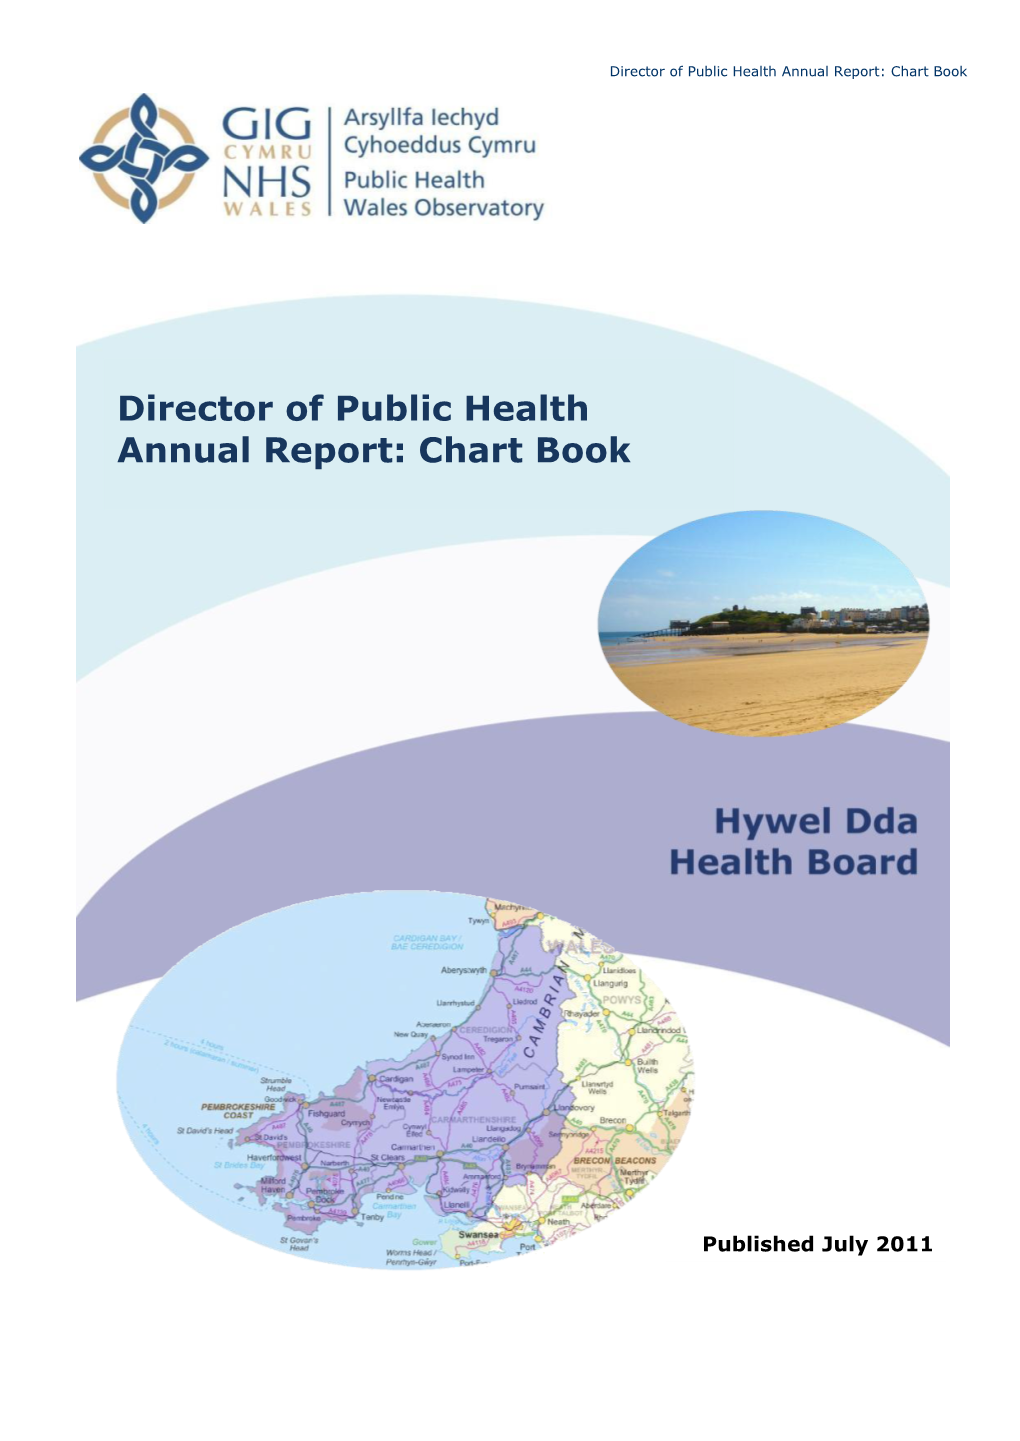 Director of Public Health Annual Report: Chart Book